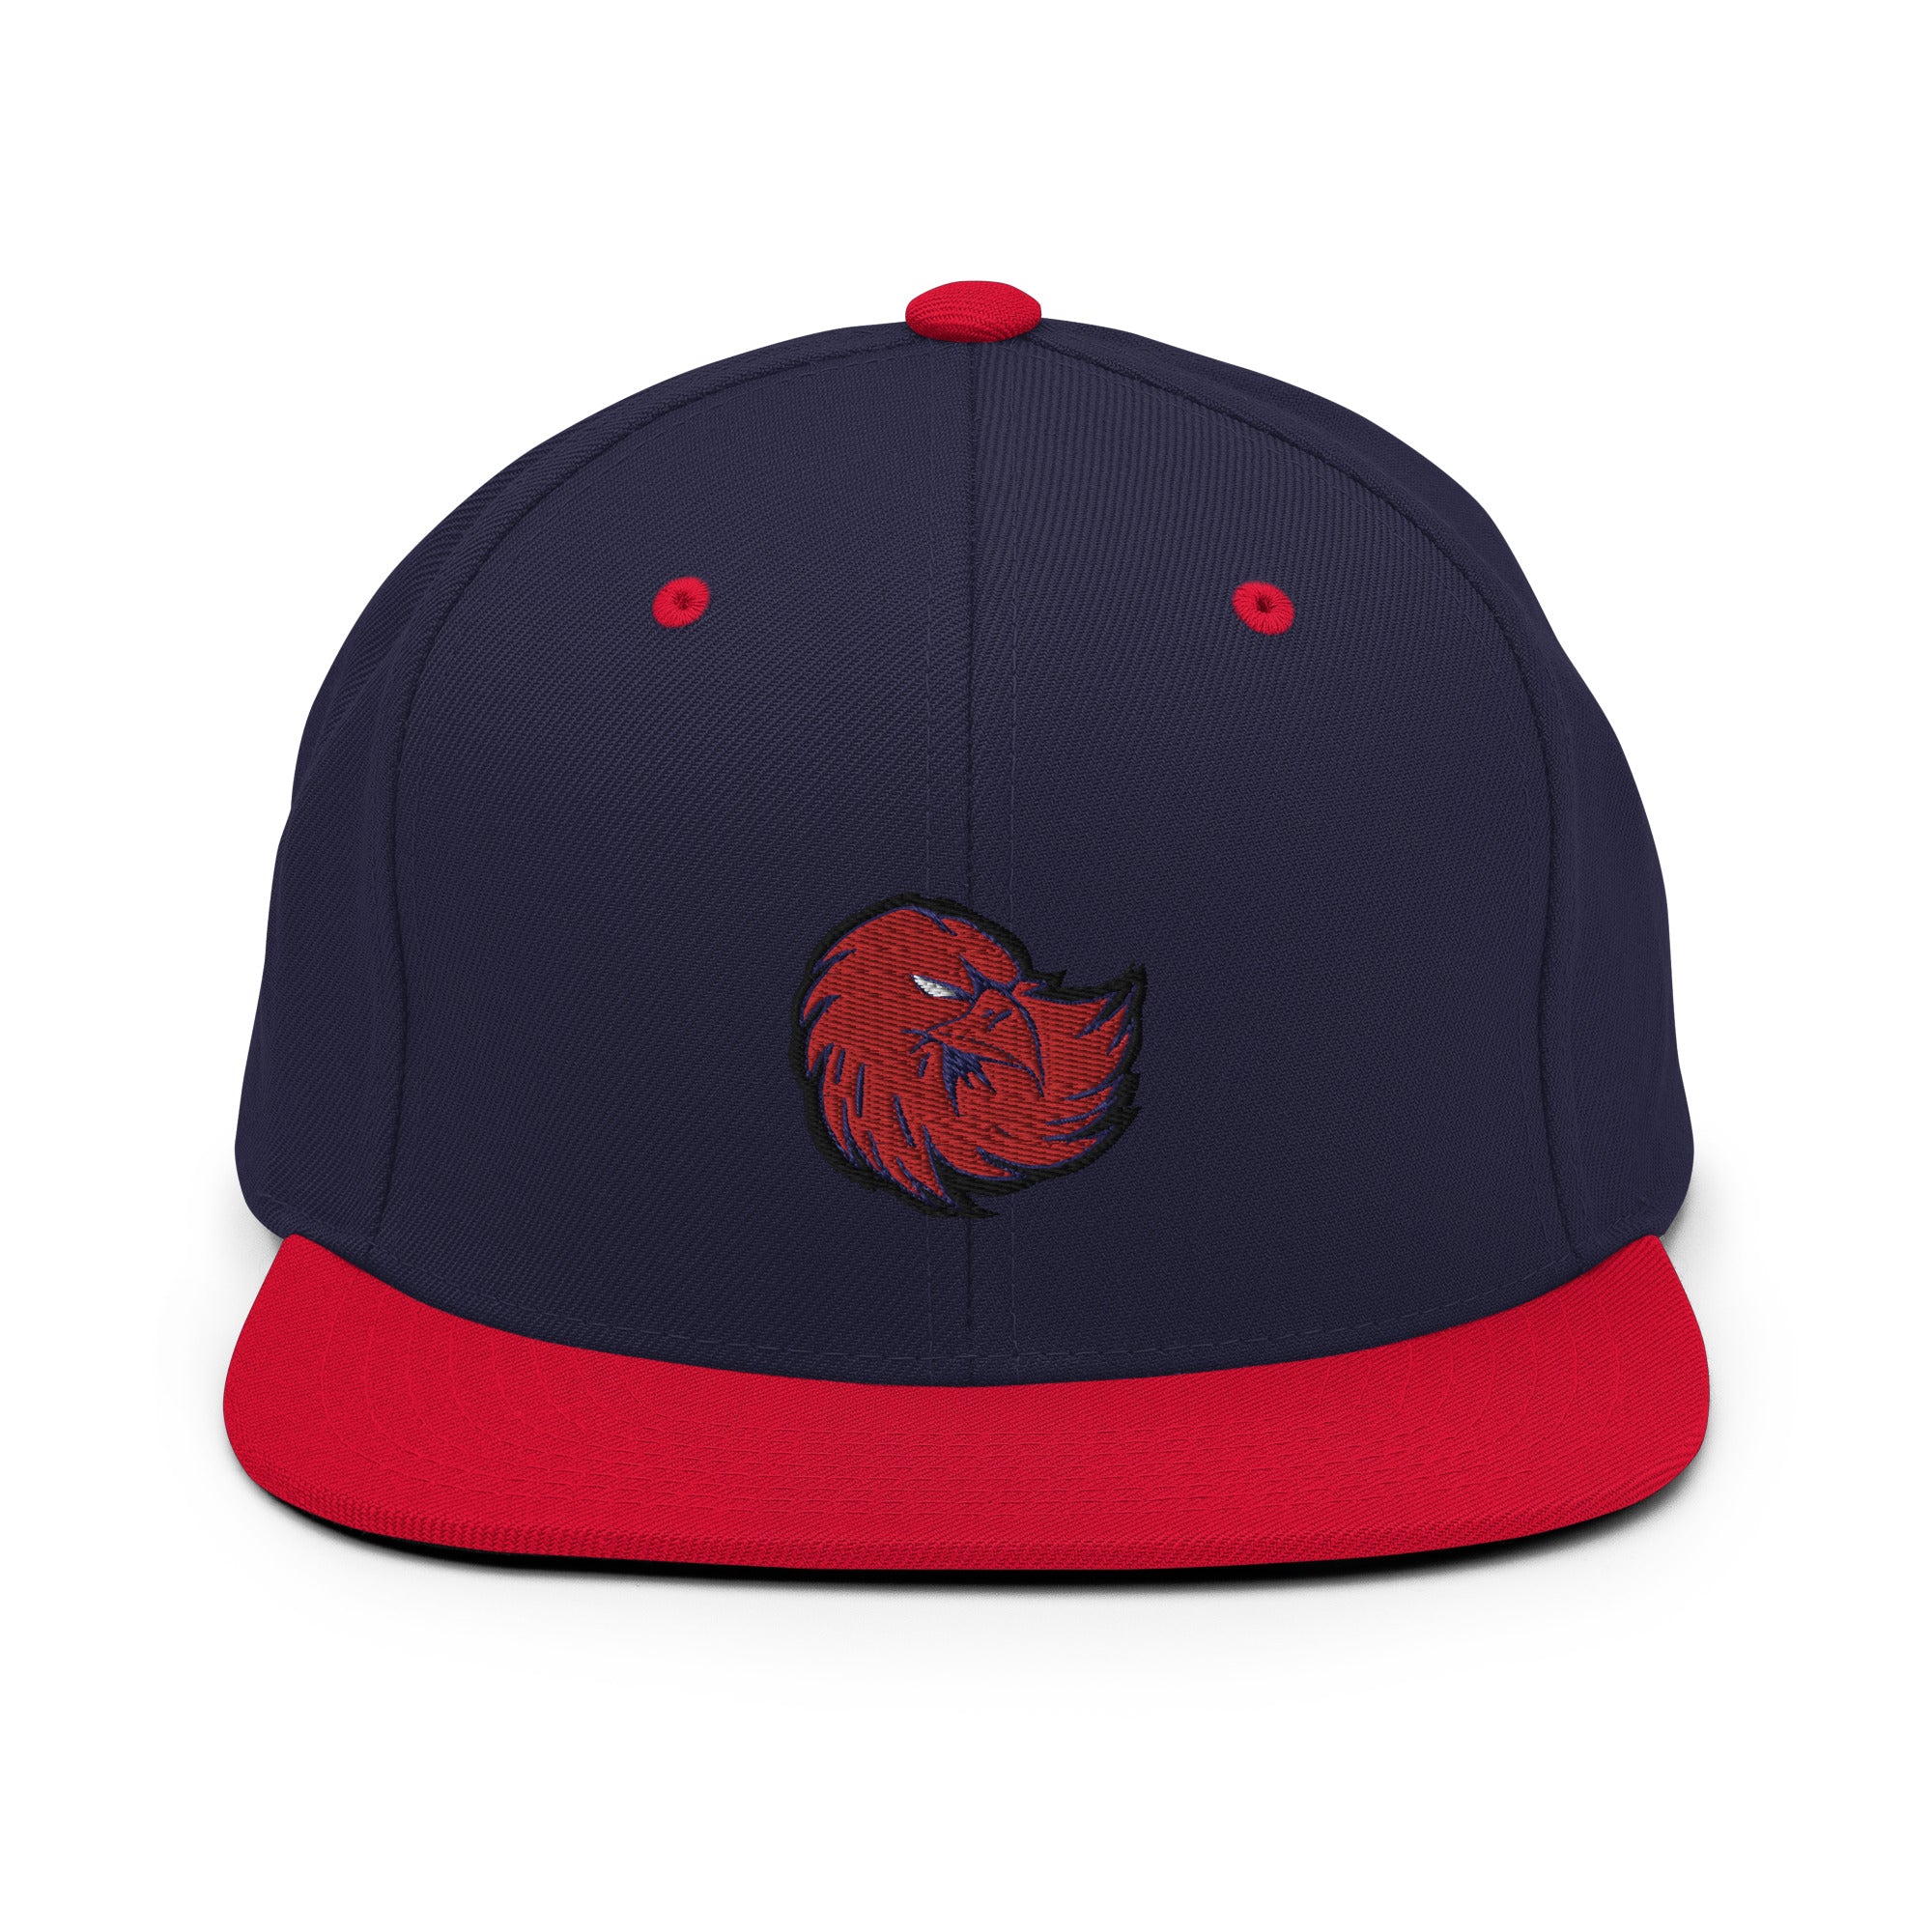 Lancaster High School | On Demand | Embroidered Snapback Hat